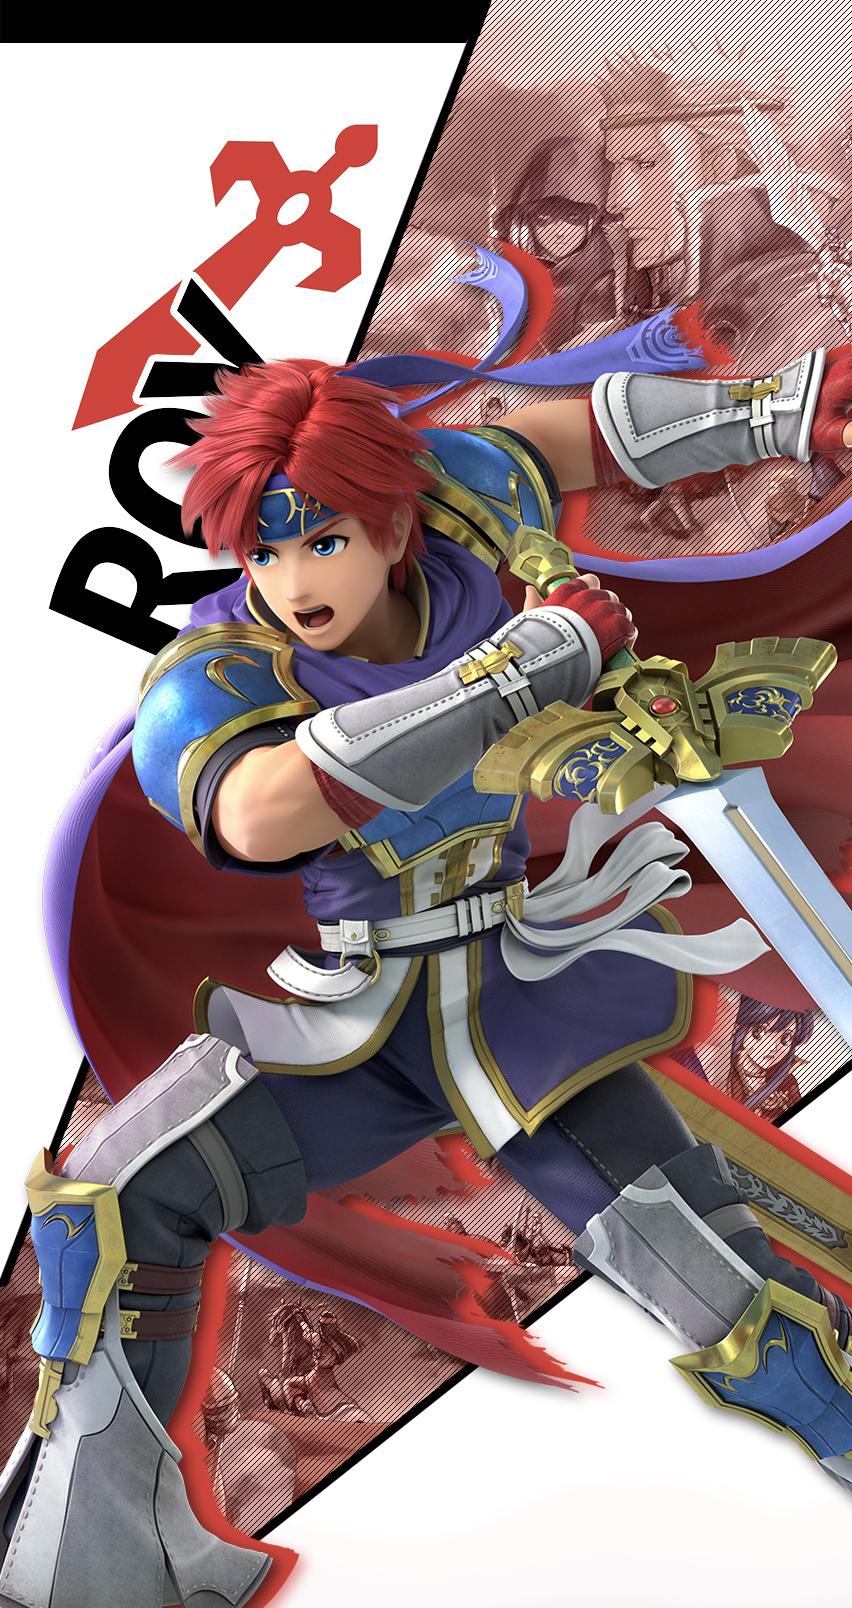 Phone wallpaper of our boy Roy